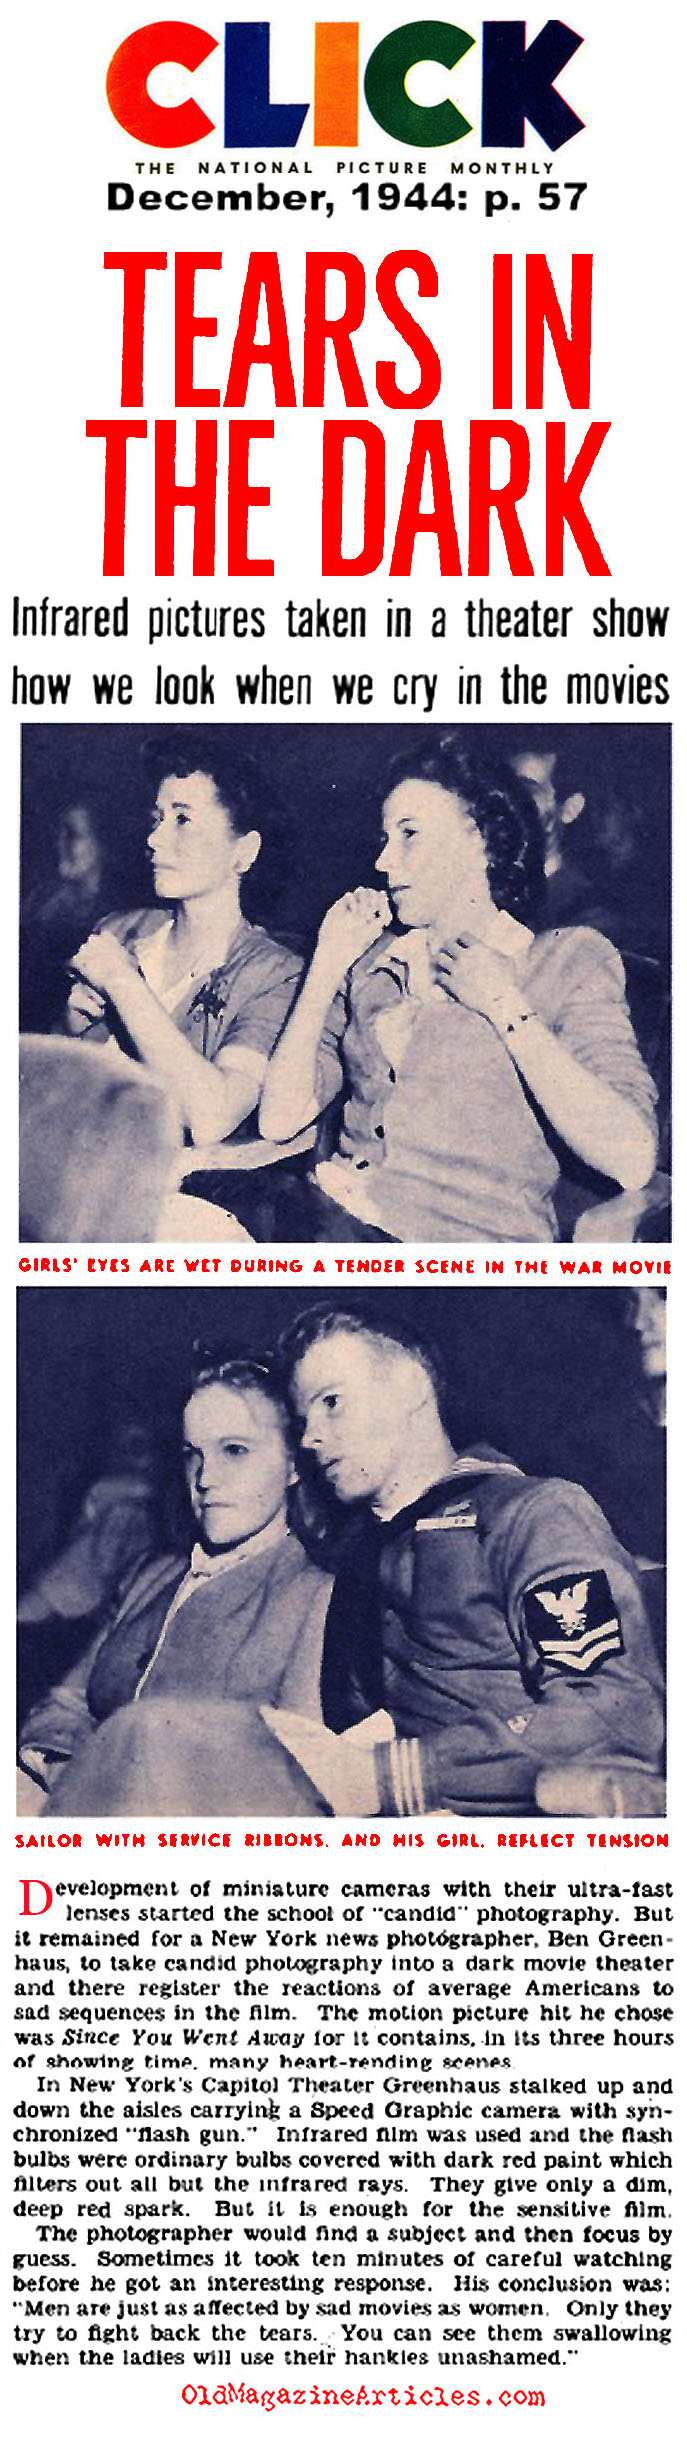 Tears in the Dark of the Theater (Click Magazine, 1944)